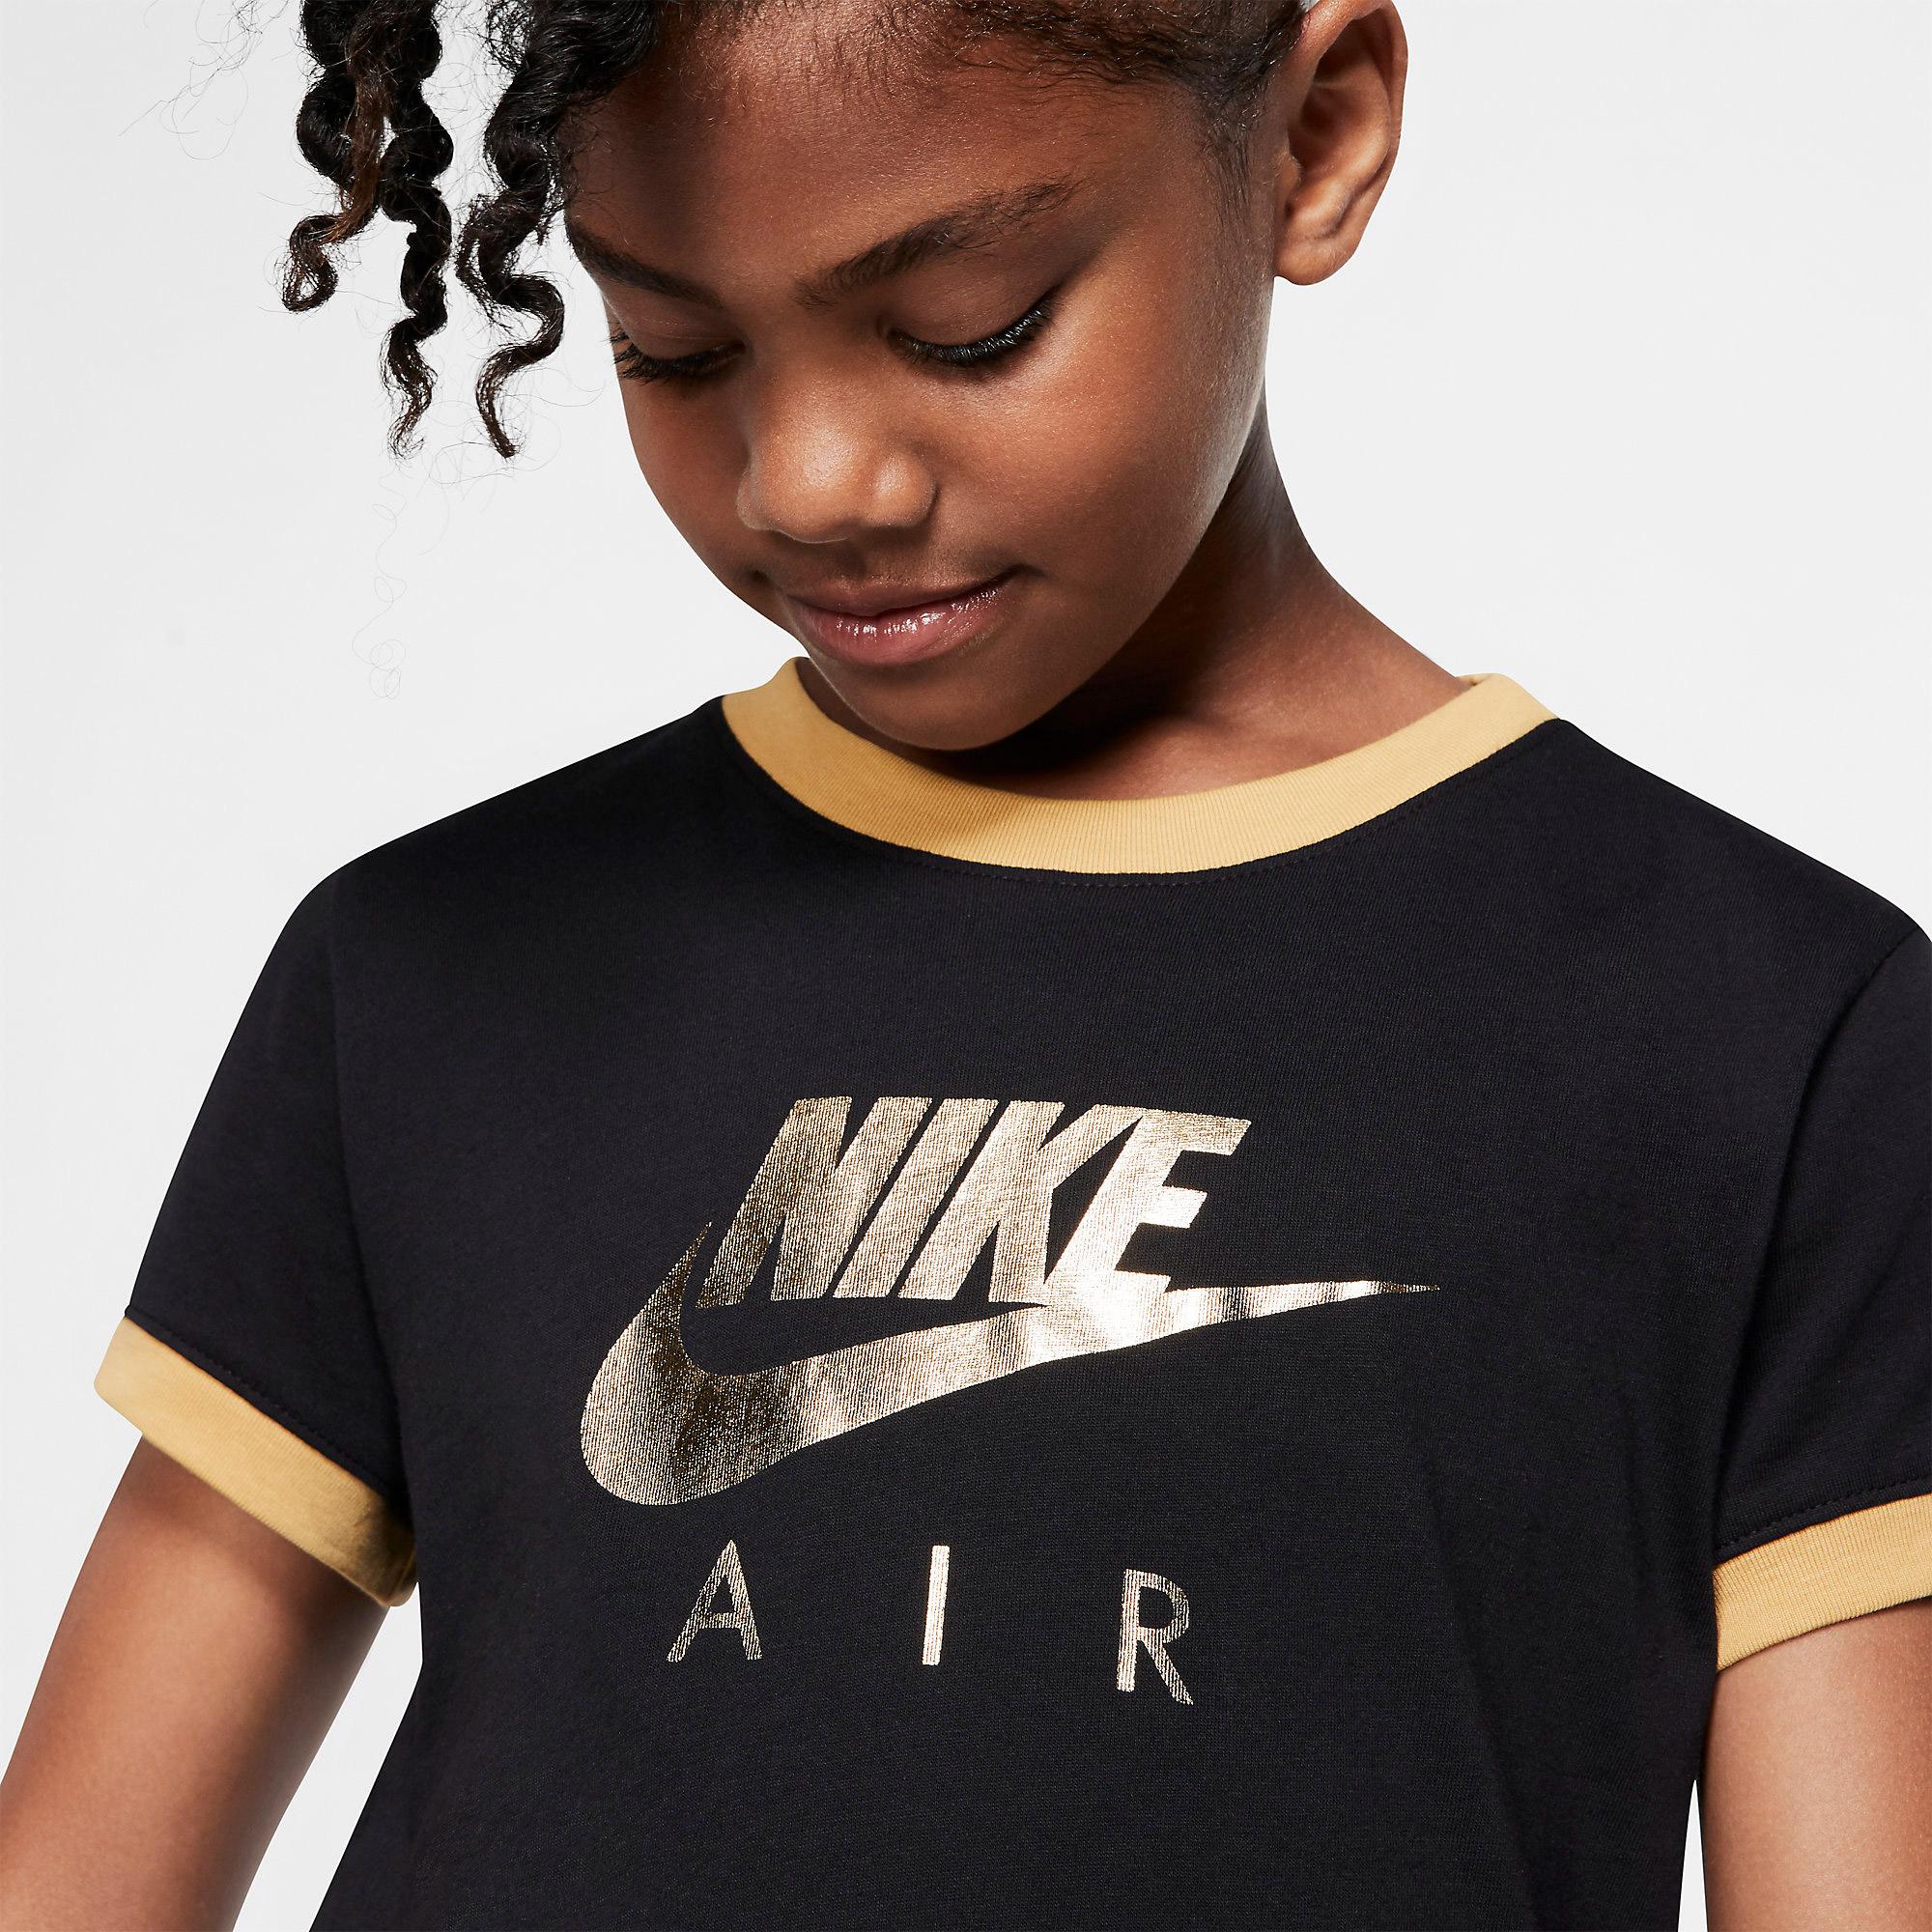 black nike shirt with gold